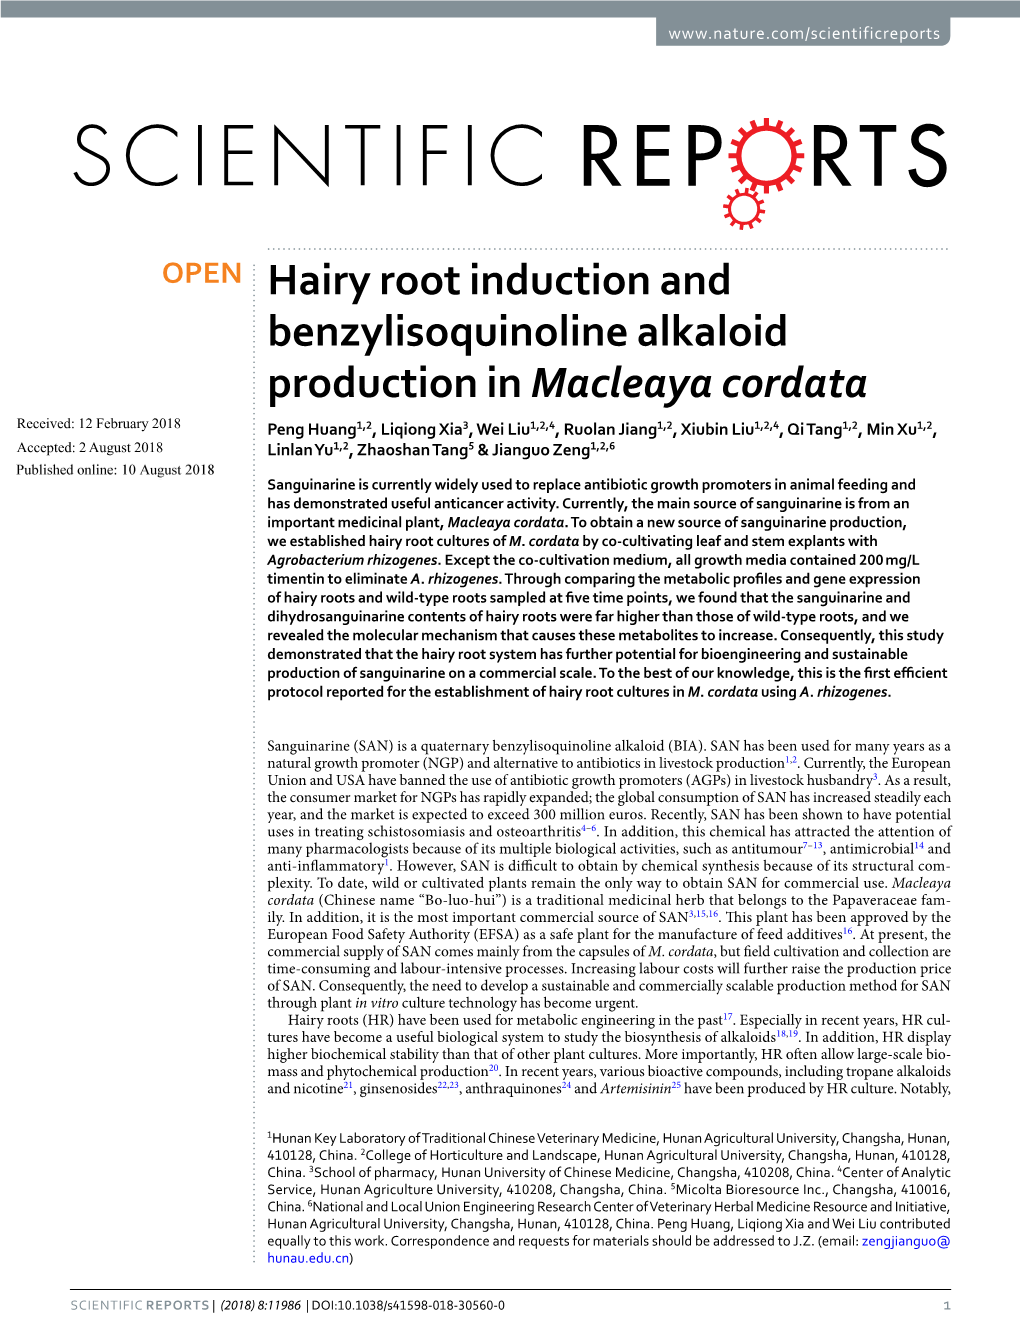 Hairy Root Induction and Benzylisoquinoline Alkaloid